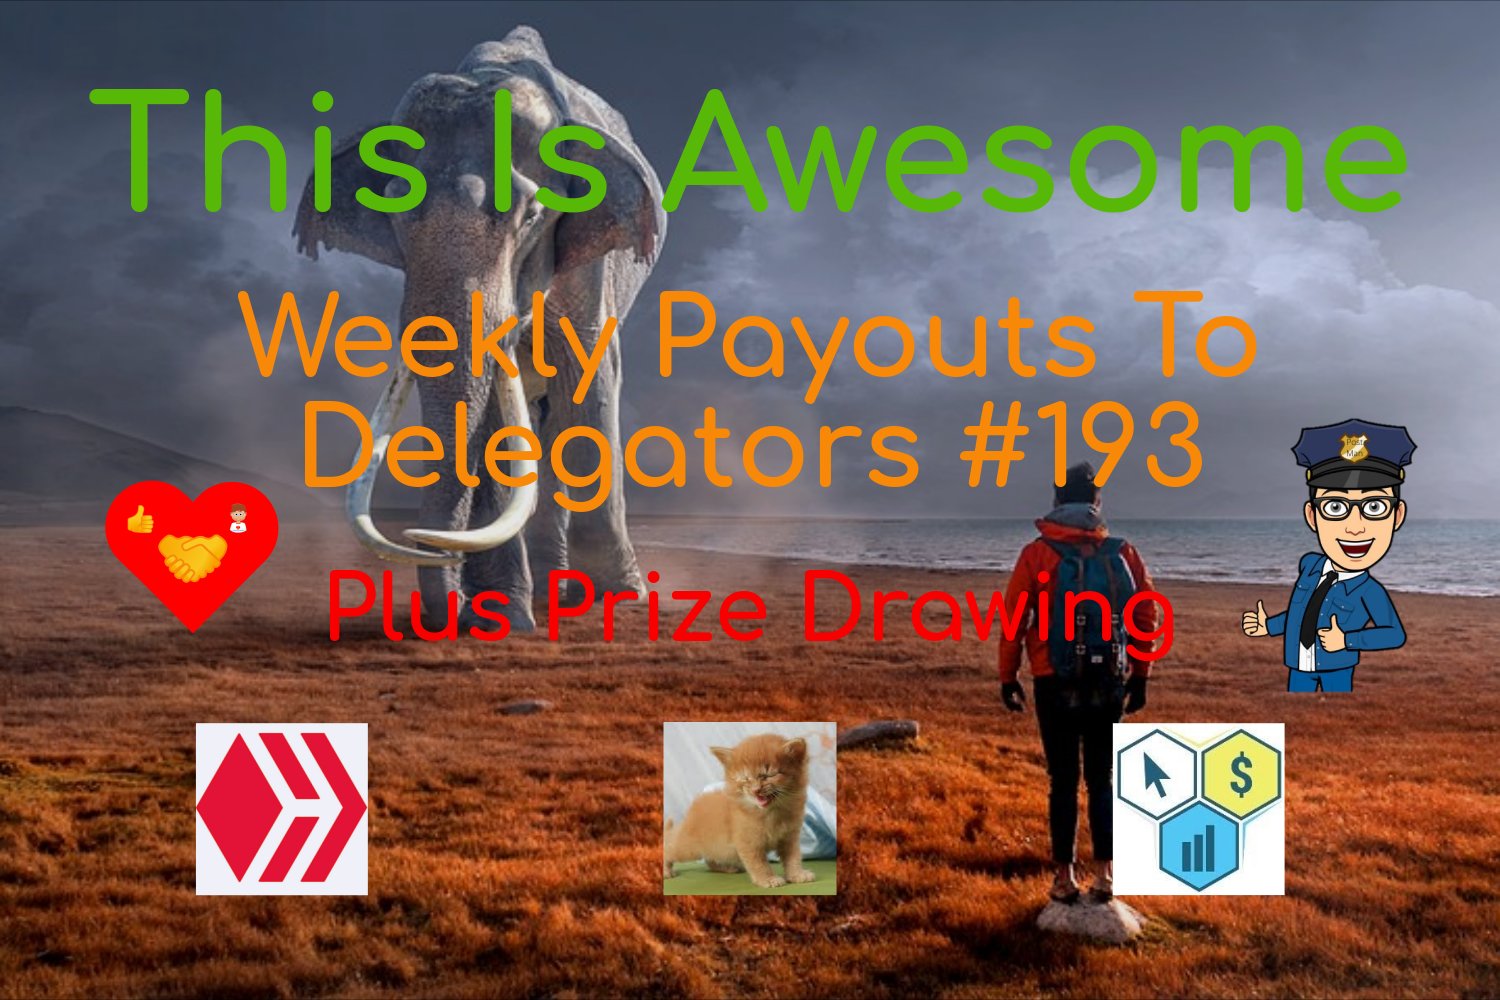 @thisisawesome/this-is-awesome-weekly-payouts-to-delegators-193-plus-prize-drawing